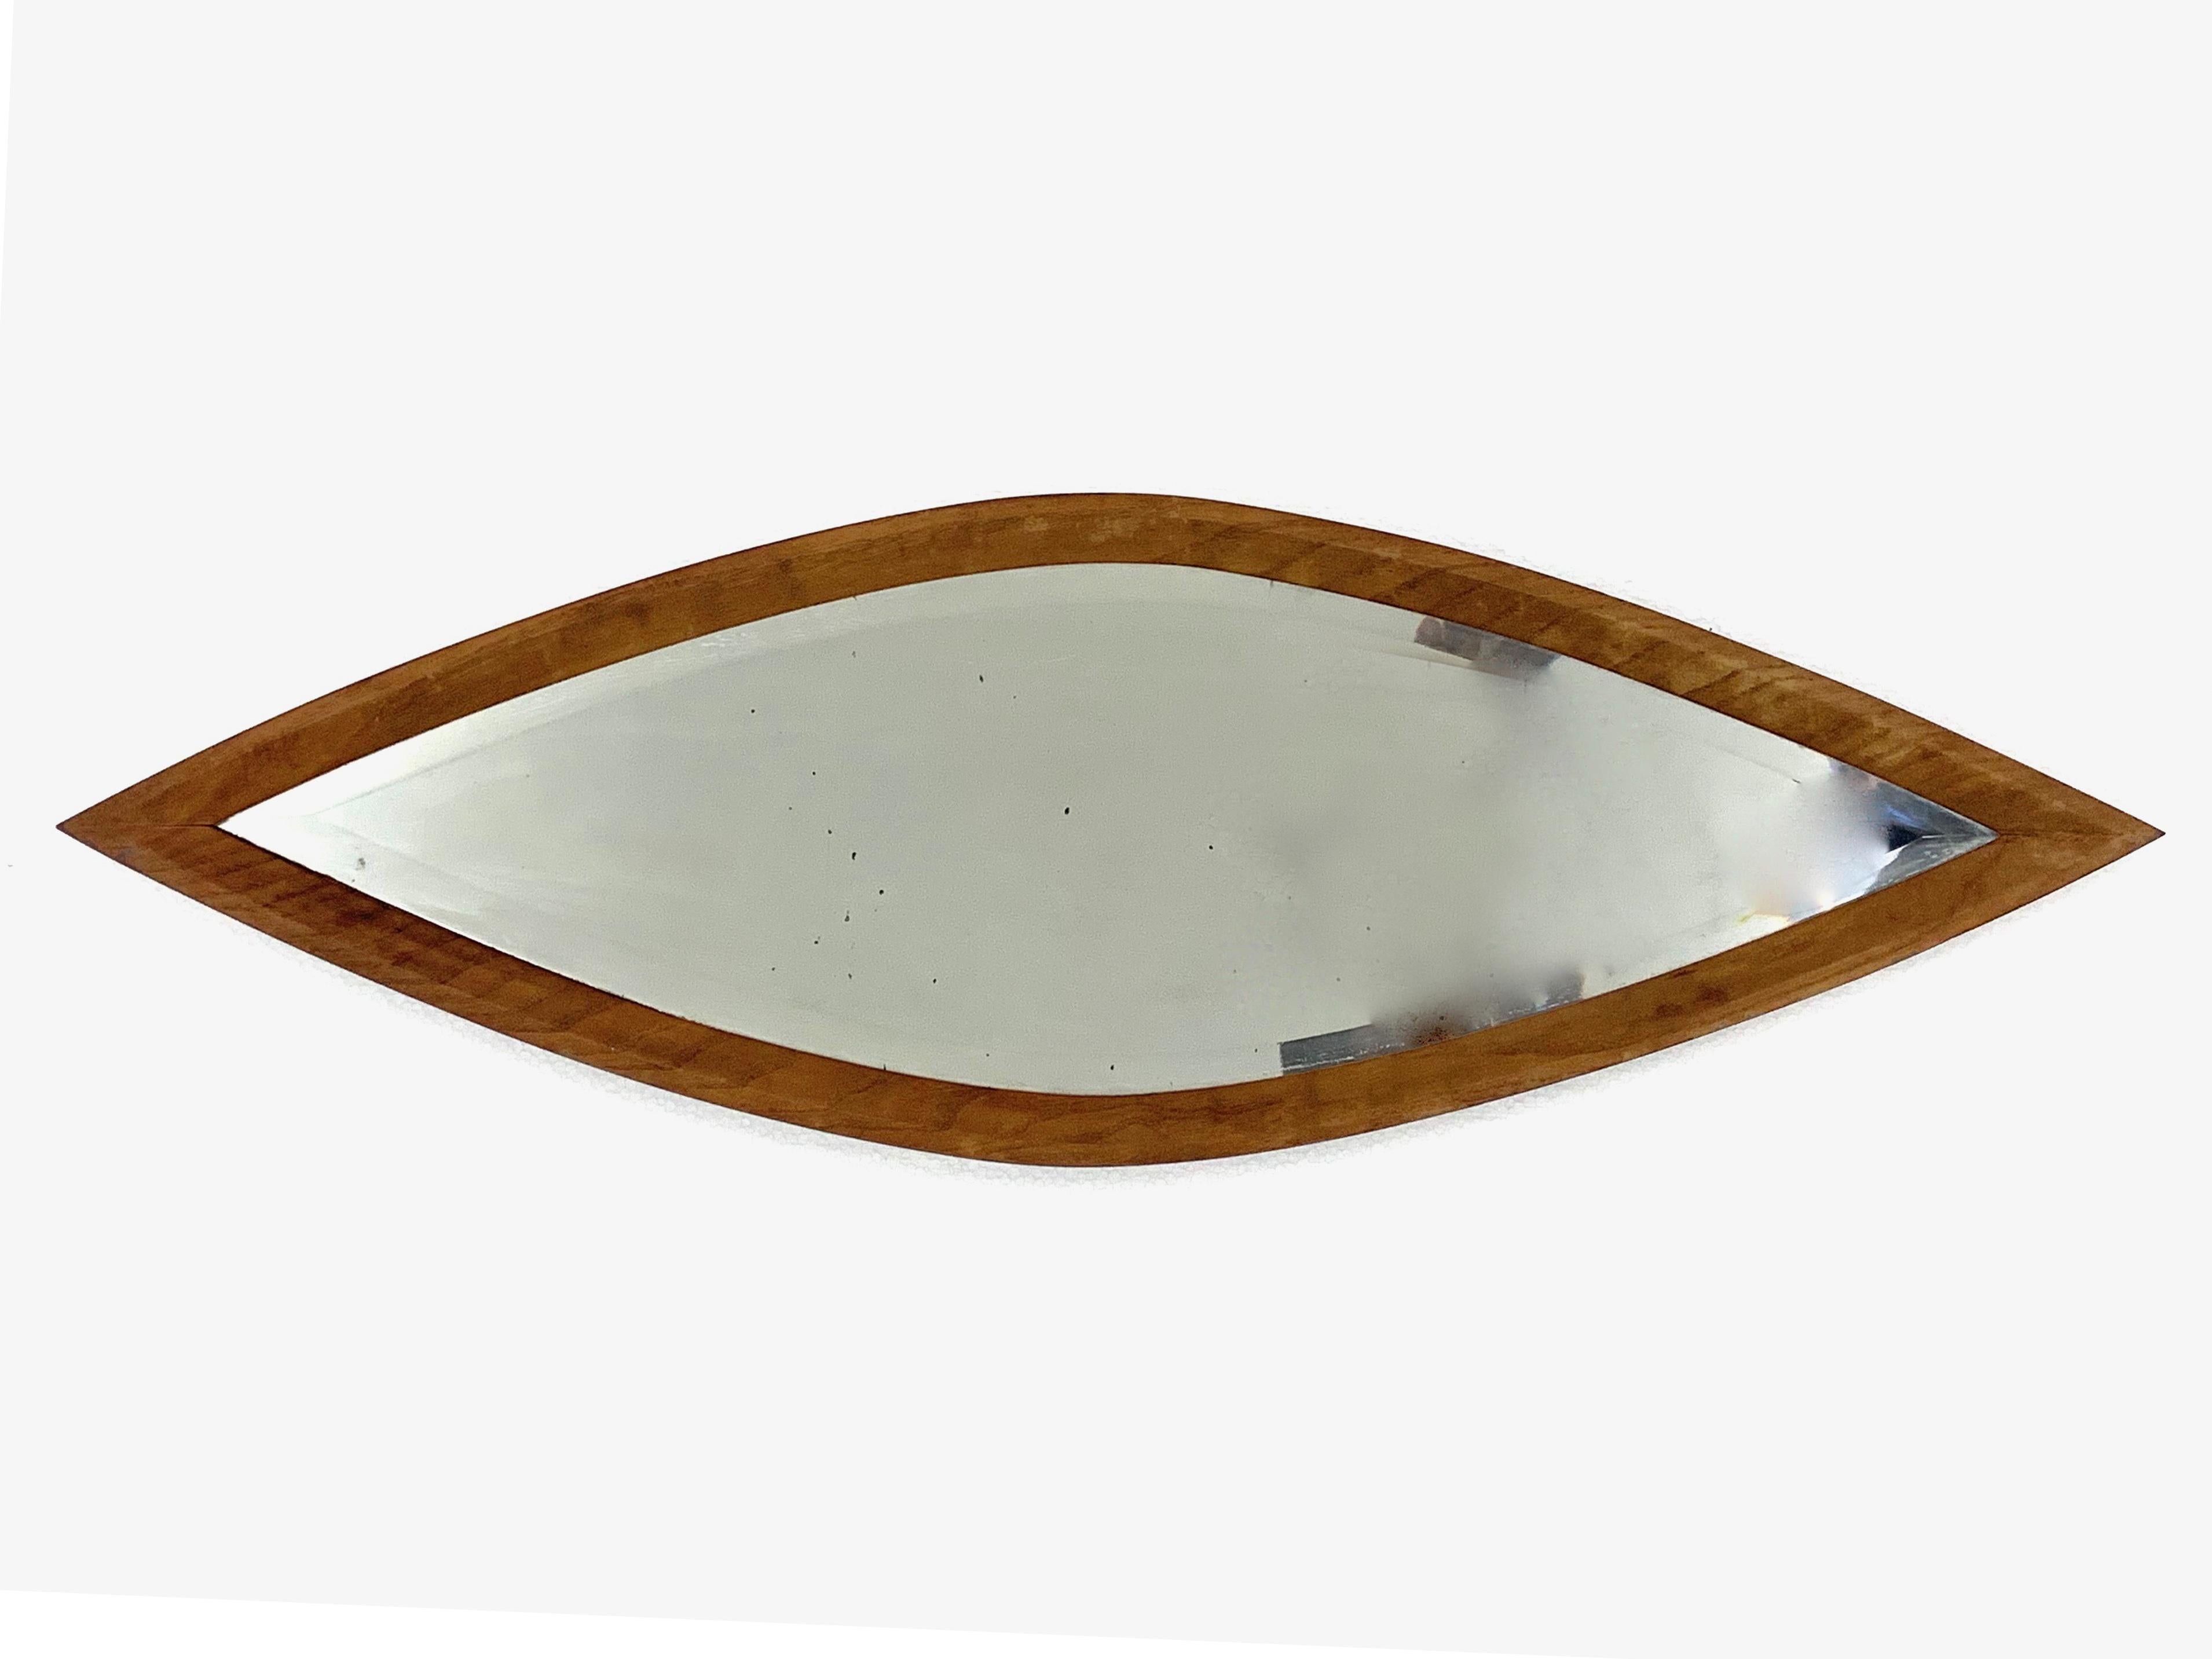 Particular eye-shaped mirror. Walnut wood.
The mirror is ground, the frame and the cover are in solid wood.
Measure: 90 x 29.5 x 2.5 cm
Vintage, signs of use of time.